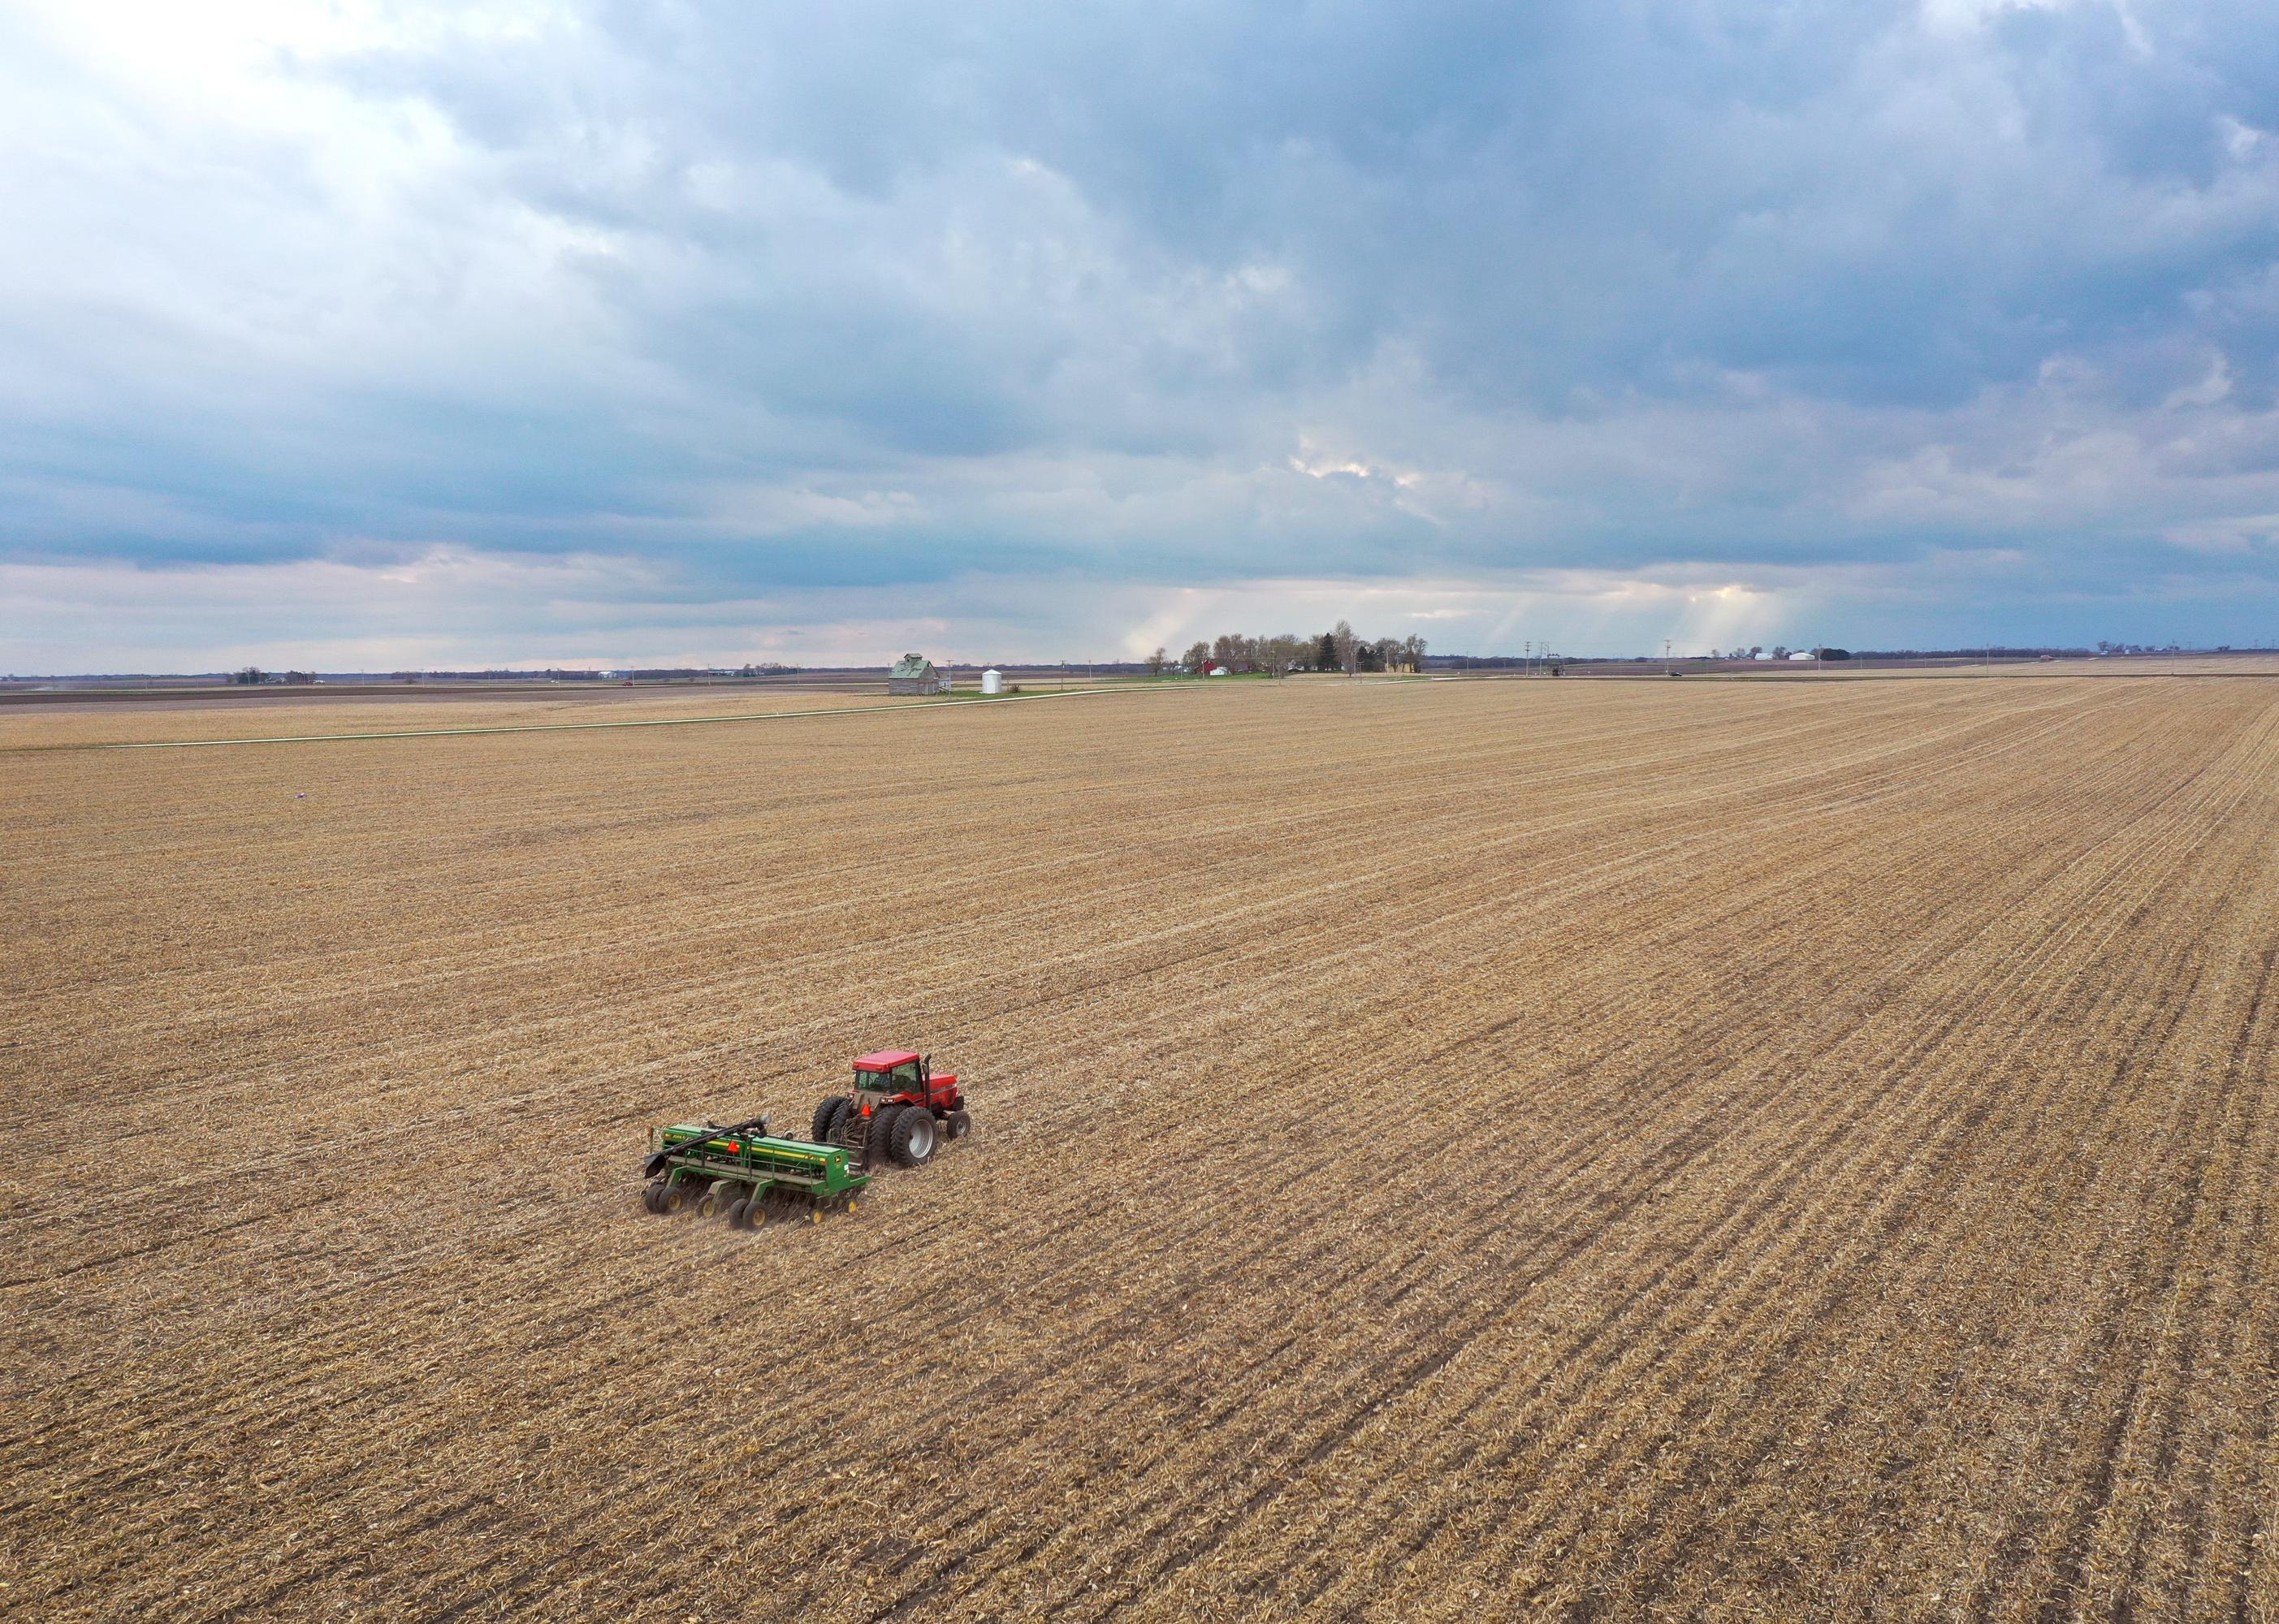 An aerial view of a tractor planting on a field.